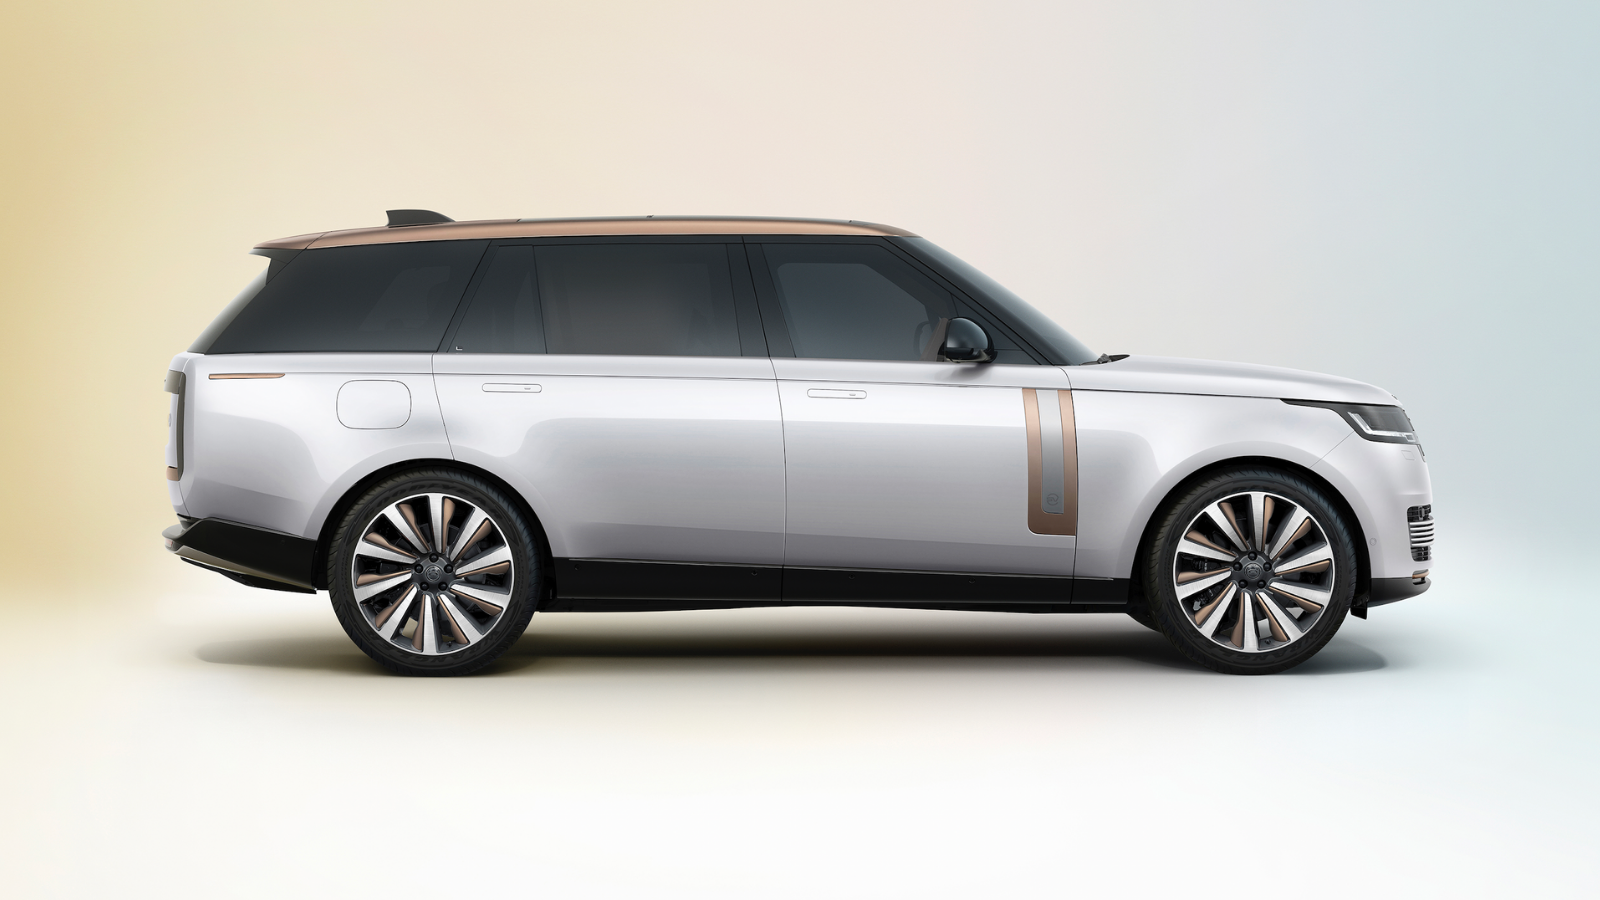 Introducing the new Range Rover  Configure and order online today